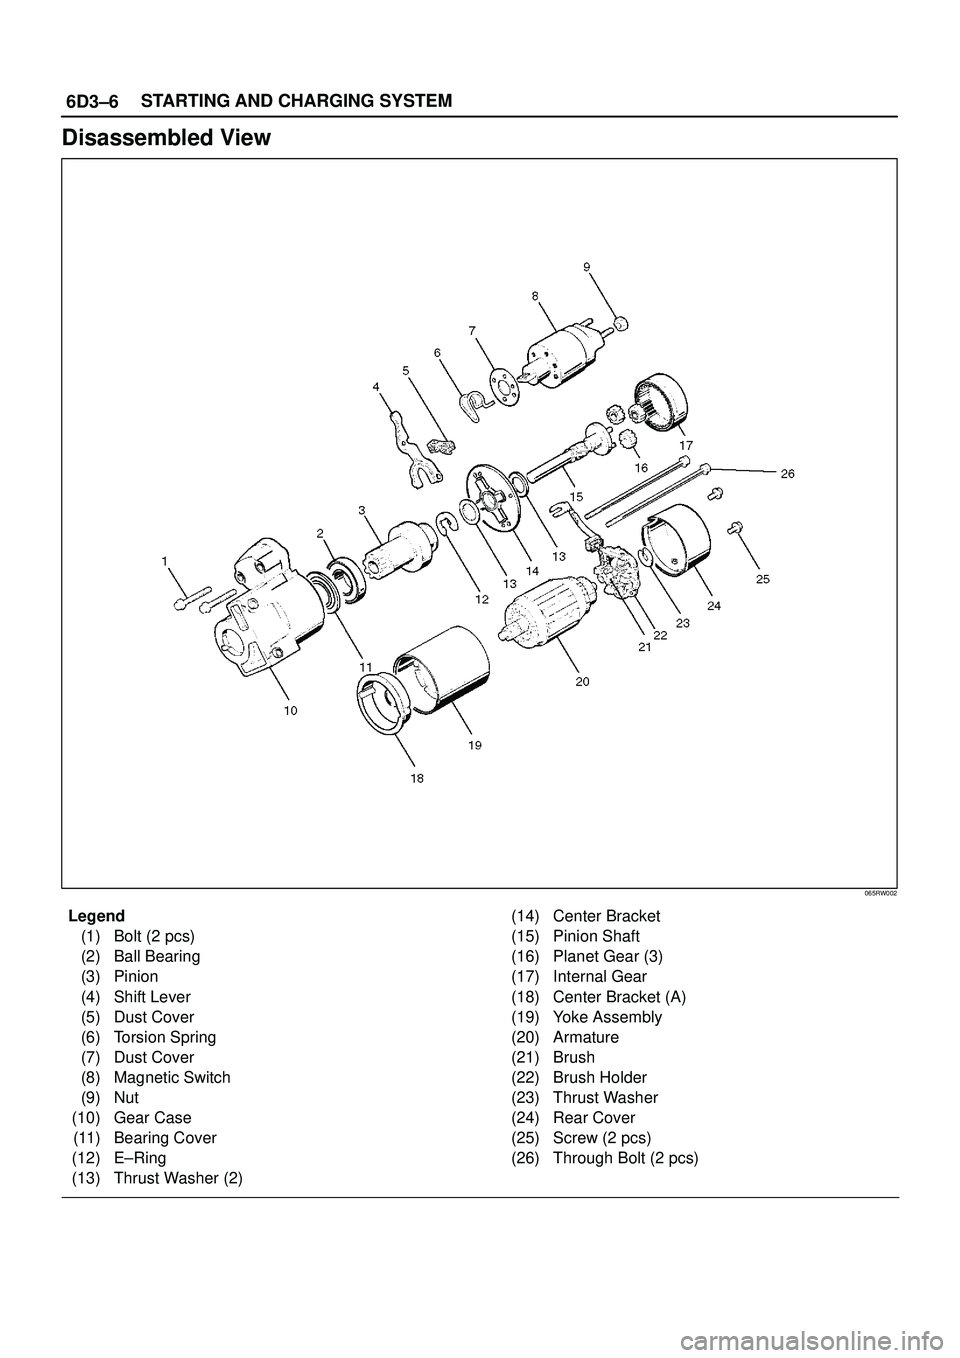 ISUZU TROOPER 1998  Service Owners Manual 6D3±6STARTING AND CHARGING SYSTEM
Disassembled View
065RW002
Legend
(1) Bolt (2 pcs)
(2) Ball Bearing
(3) Pinion
(4) Shift Lever
(5) Dust Cover
(6) Torsion Spring
(7) Dust Cover
(8) Magnetic Switch
(